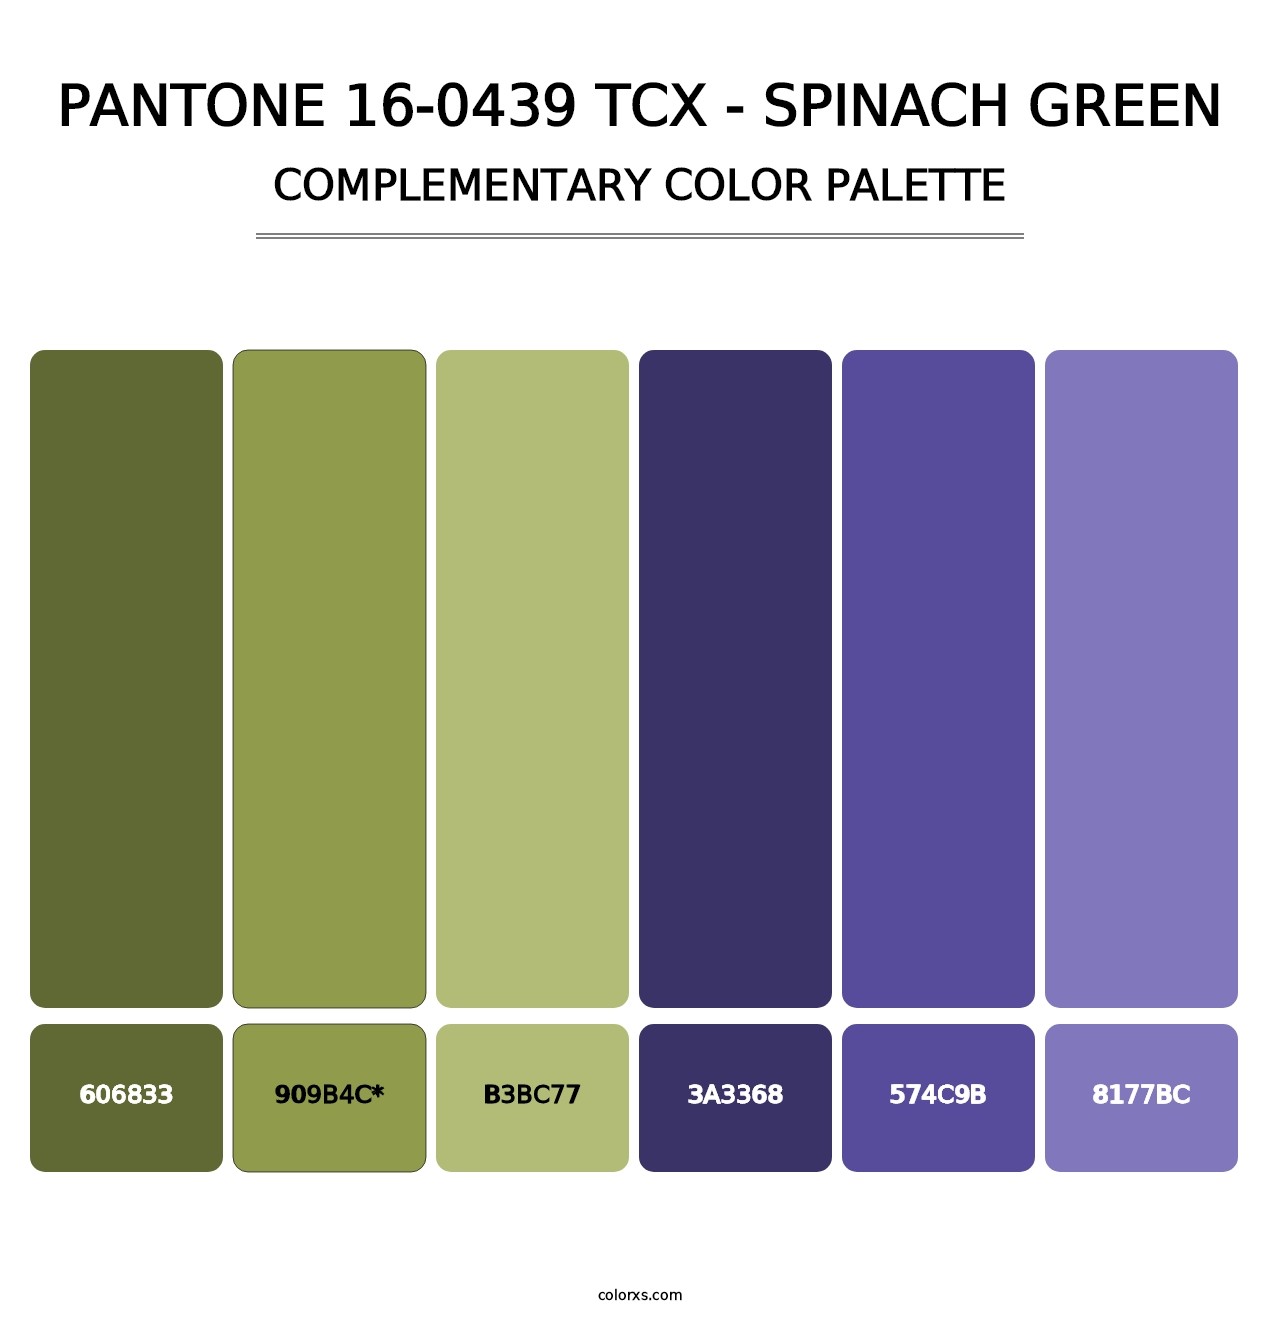 PANTONE 16-0439 TCX - Spinach Green - Complementary Color Palette